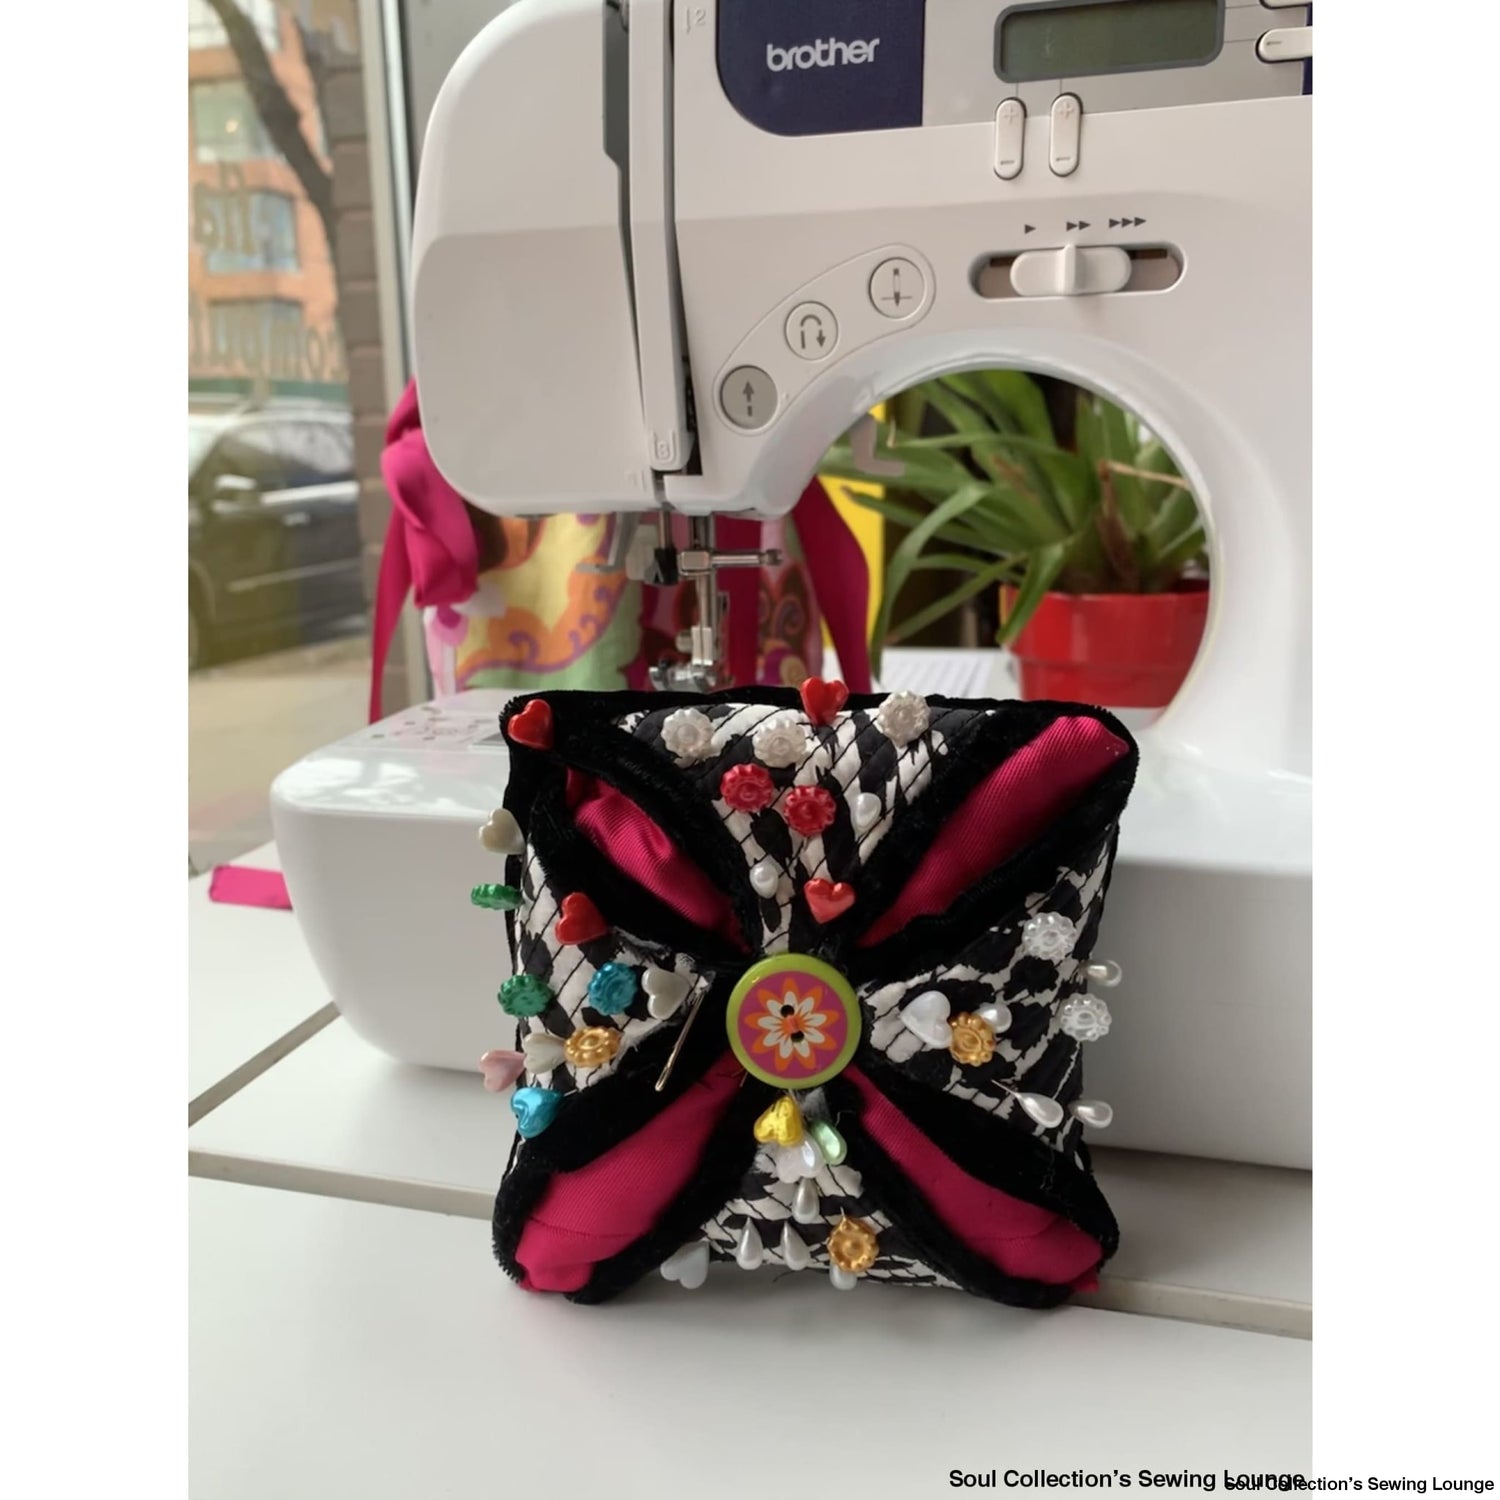 Beginners Sewing Classes - Sewing Classes